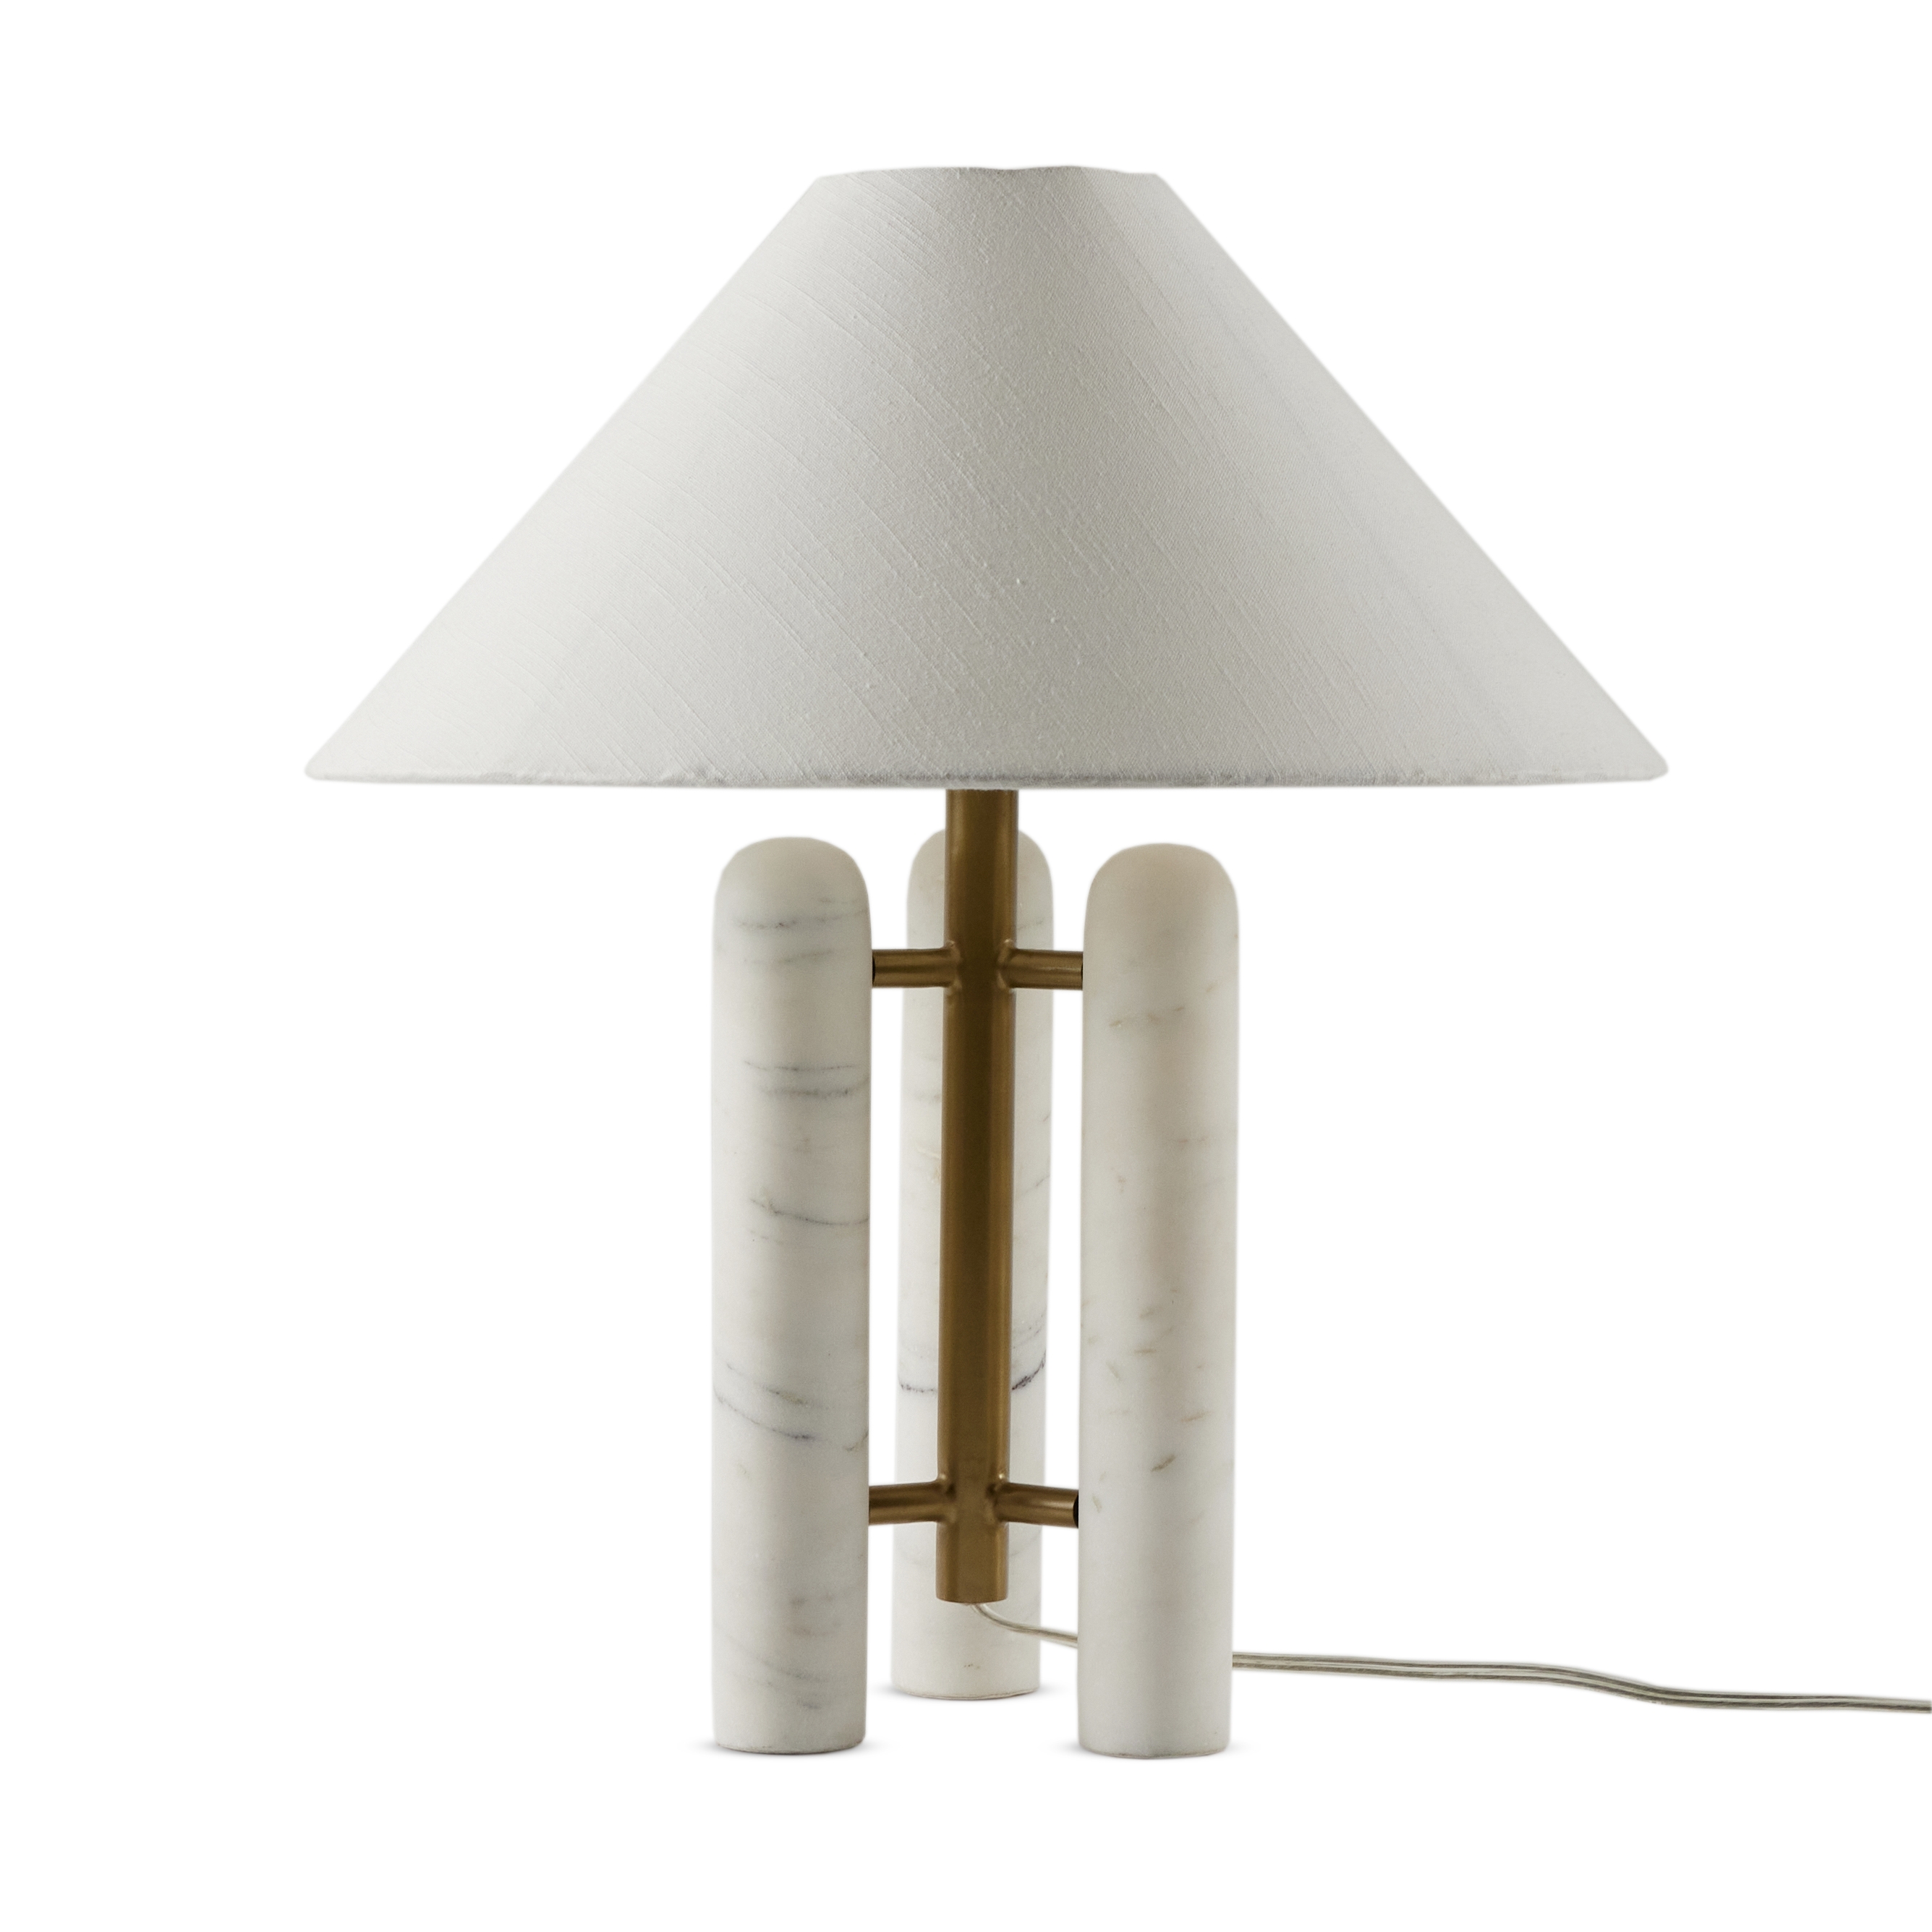 Medici Table Lamp-Chrcl And White Mrbl - Image 5